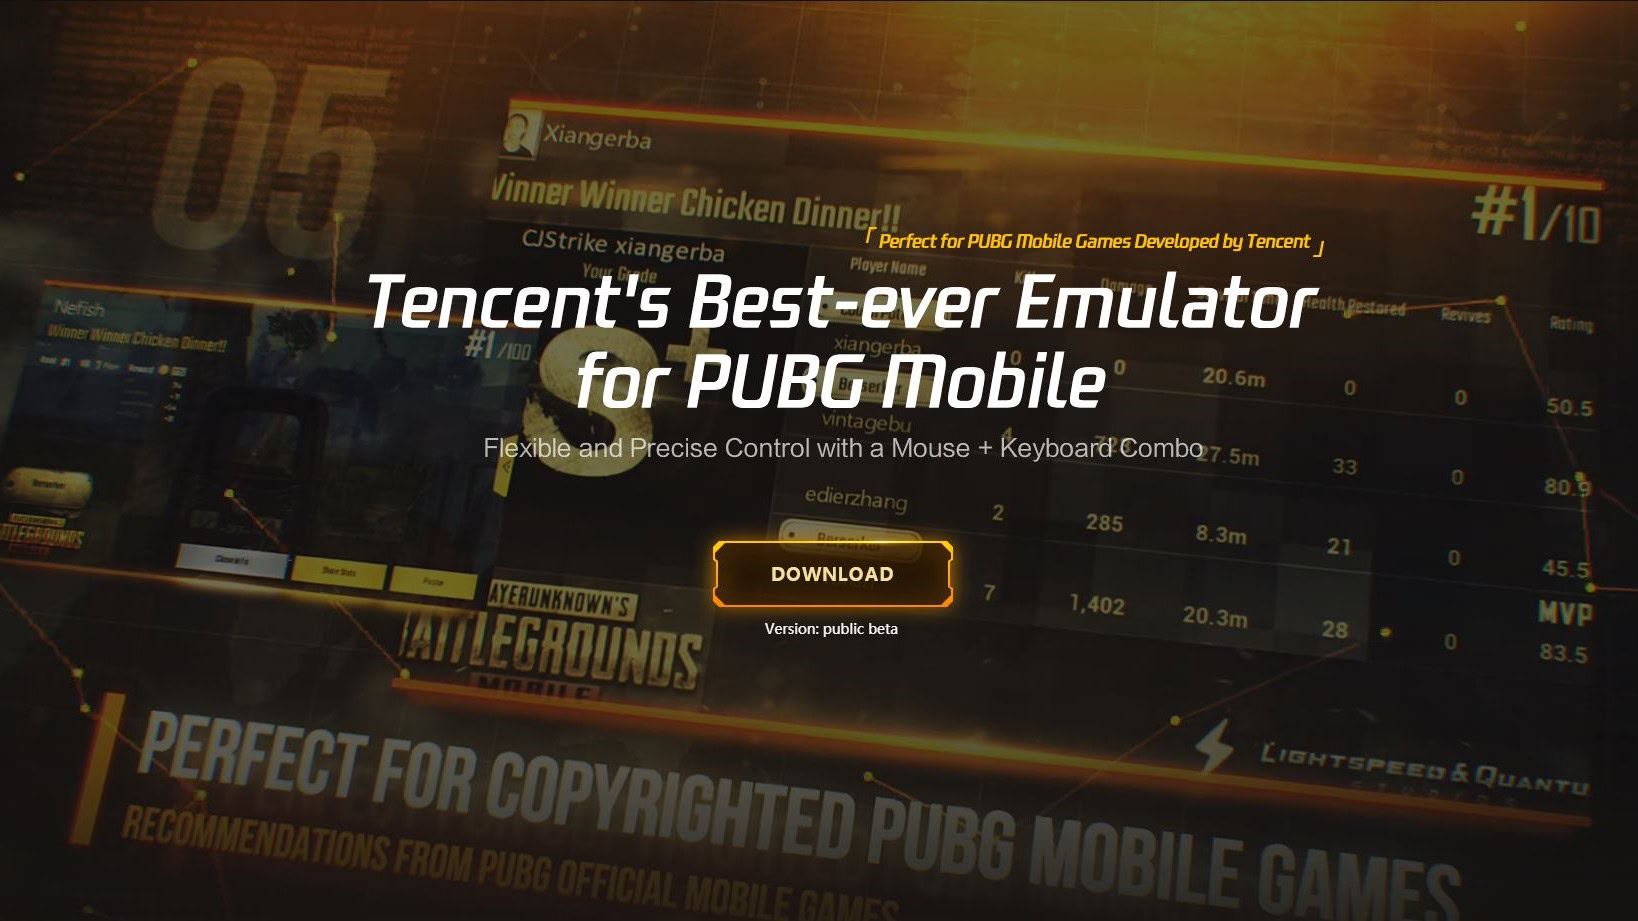 The PUBG Mobile emulator is Gameloop (Tencent Buddy)